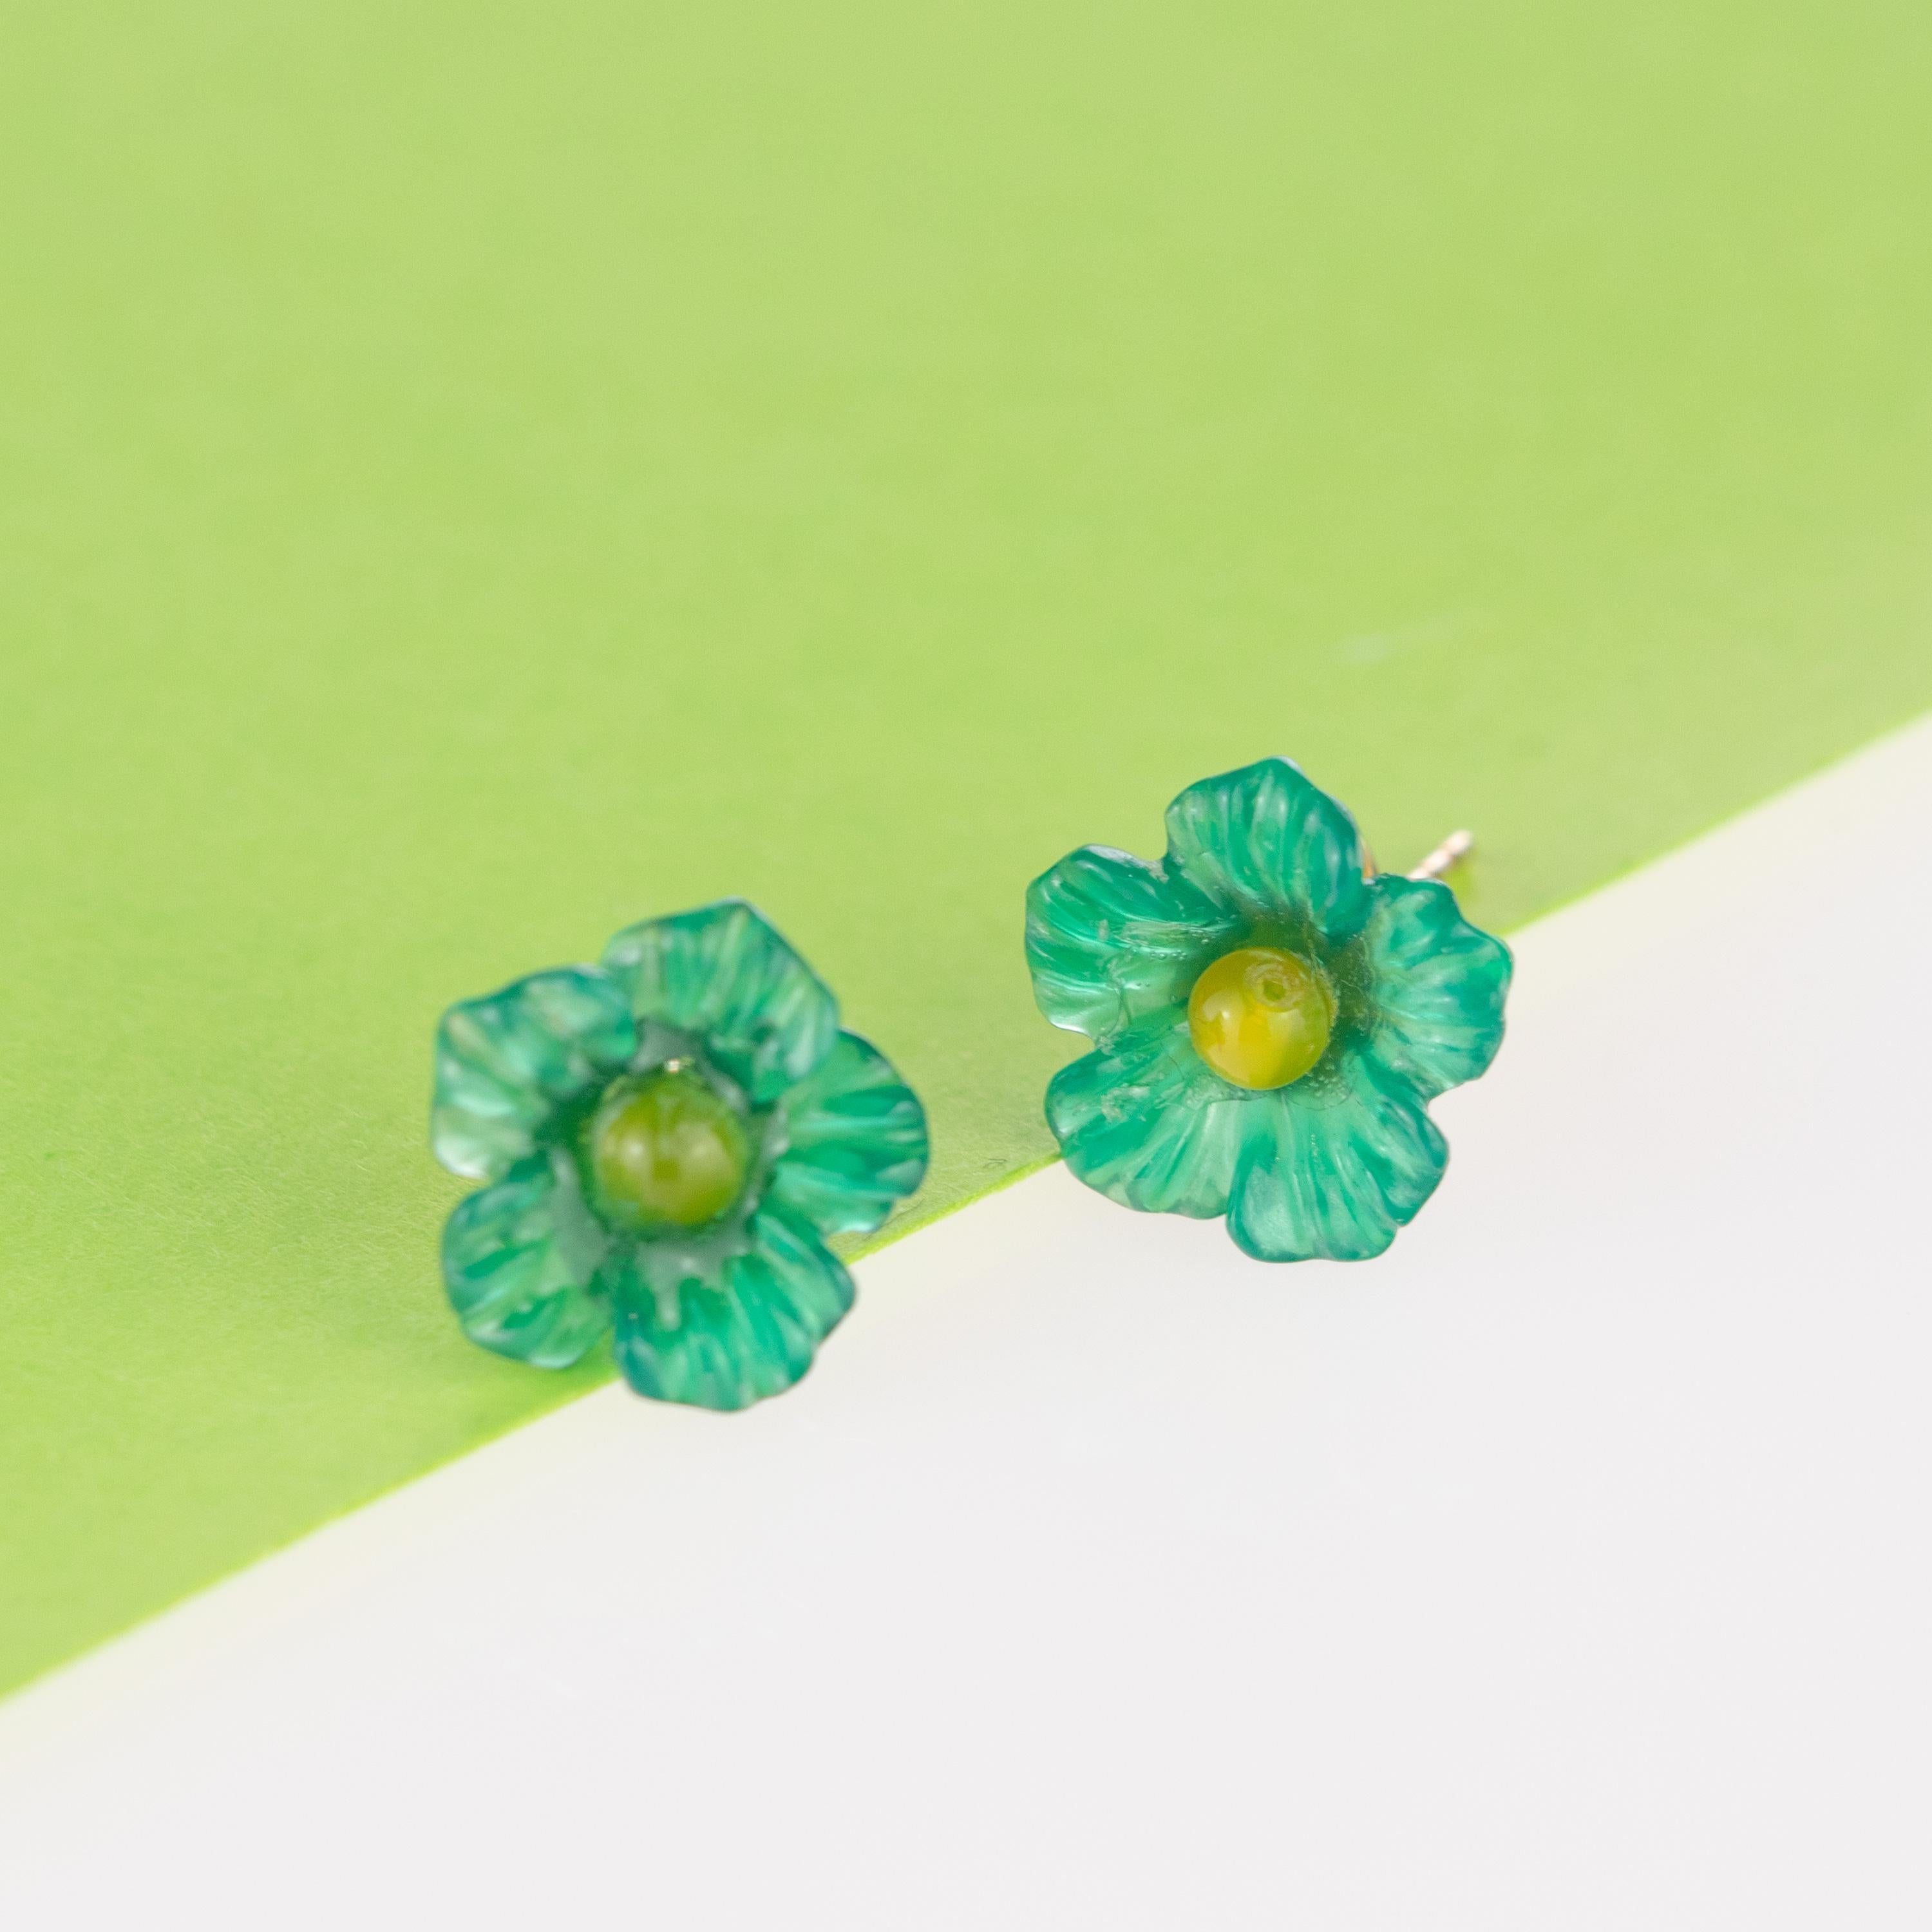 Astonishing and delicate green and yellow 2.5 carat agate flower stud earrings. Carved petals that evoke the italian handmade traditional jewelry work wrapping itself in a soft look enriched with Gold Plate  manifesting glamour and exquisite taste.
